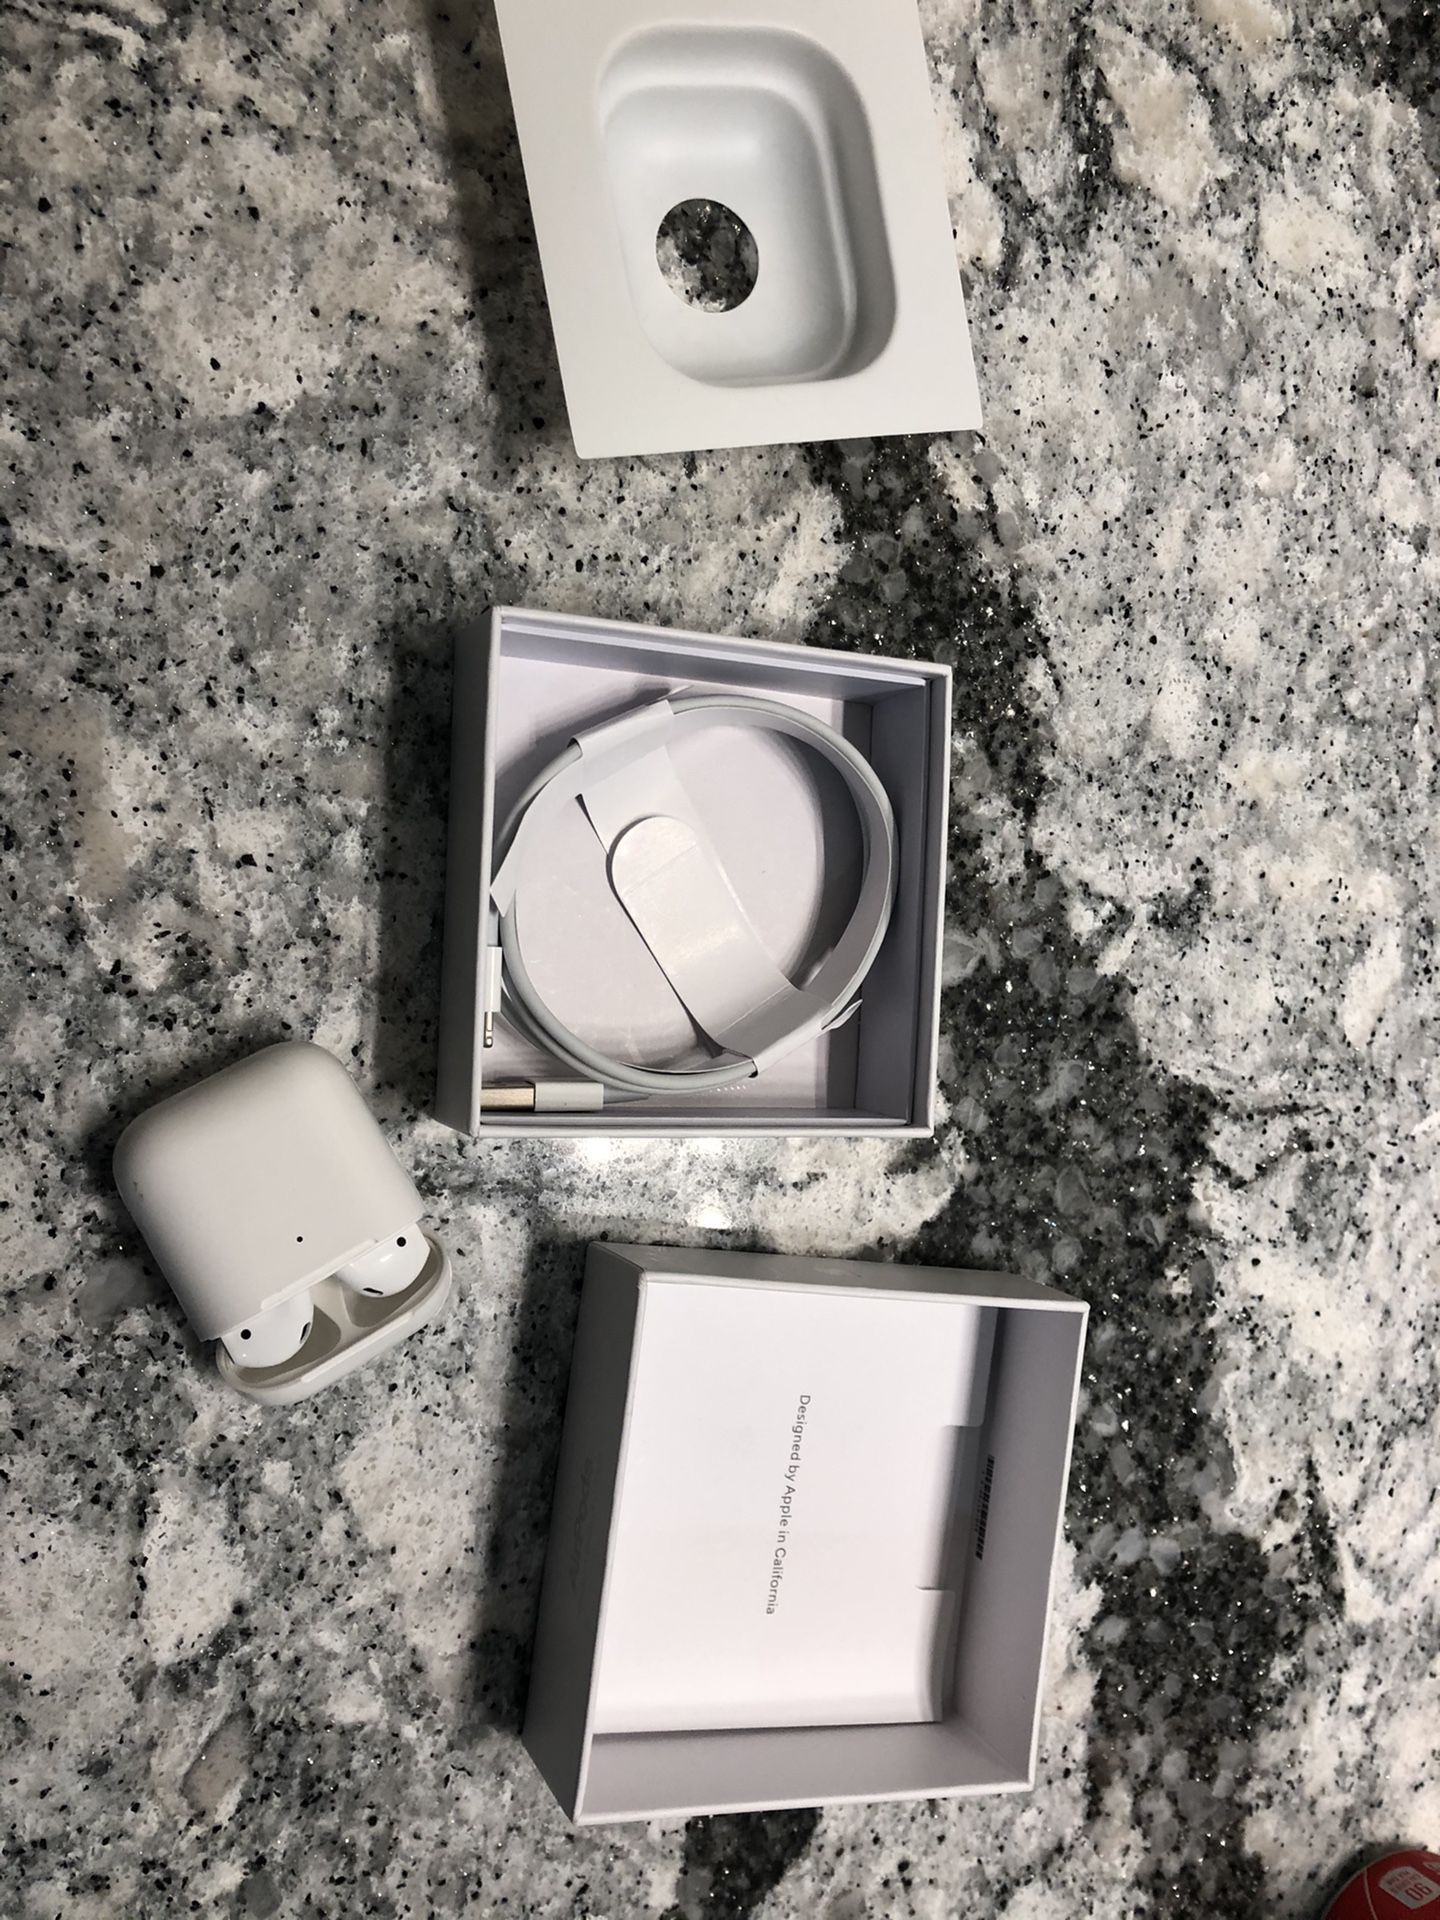 AirPods series 2 with wireless charging